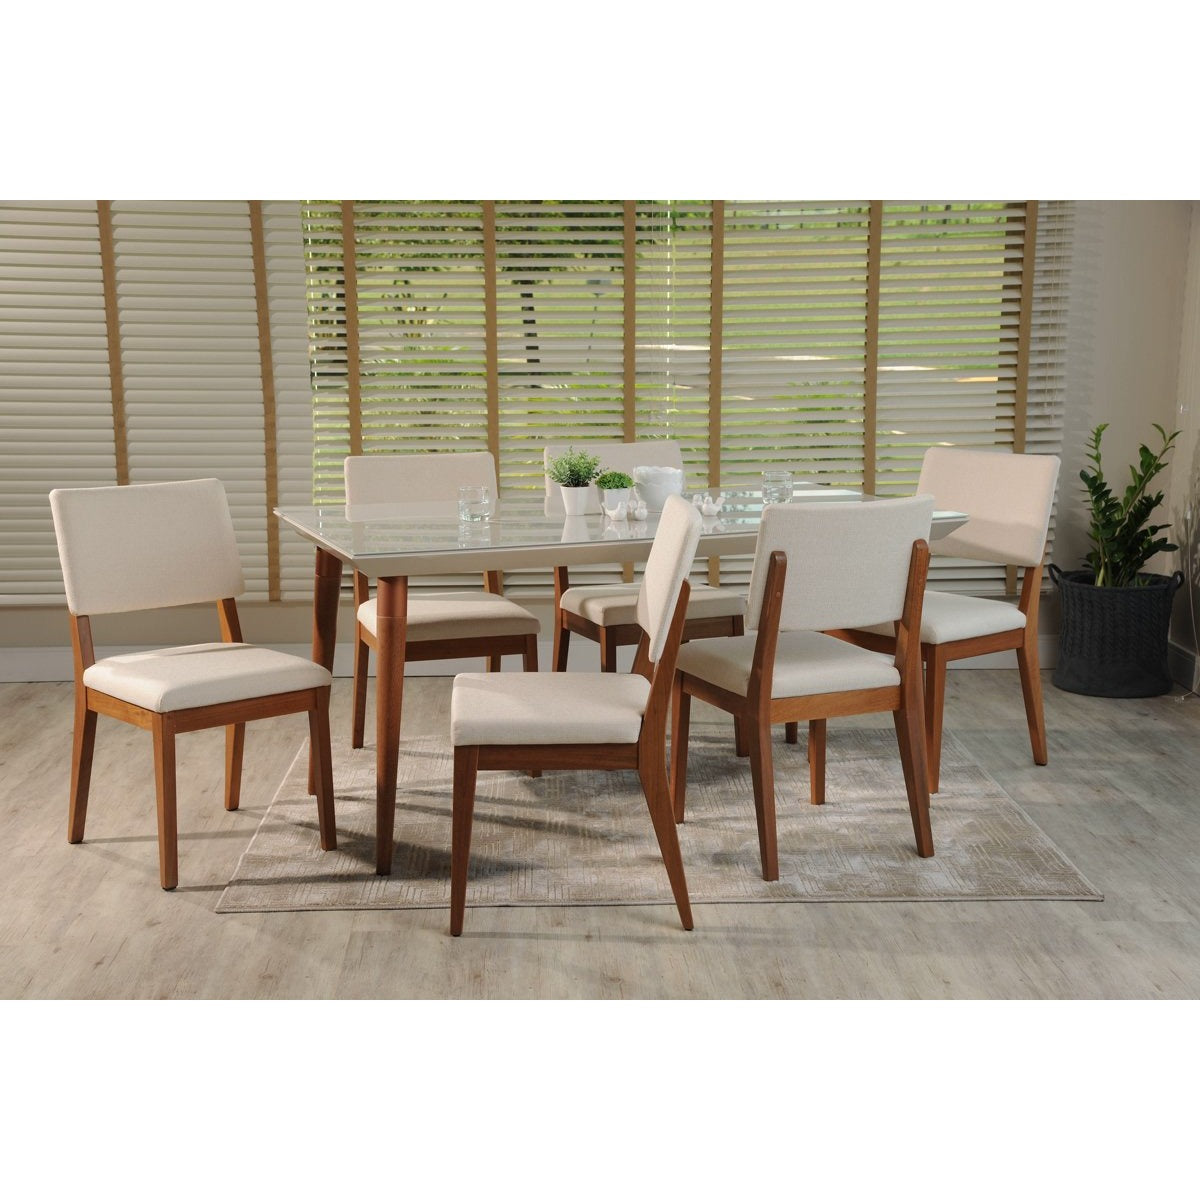 Manhattan Comfort 7-Piece Utopia 70.86" and Dover Dining Set with 6 Dining Chairs in Off White and Beige-Minimal & Modern